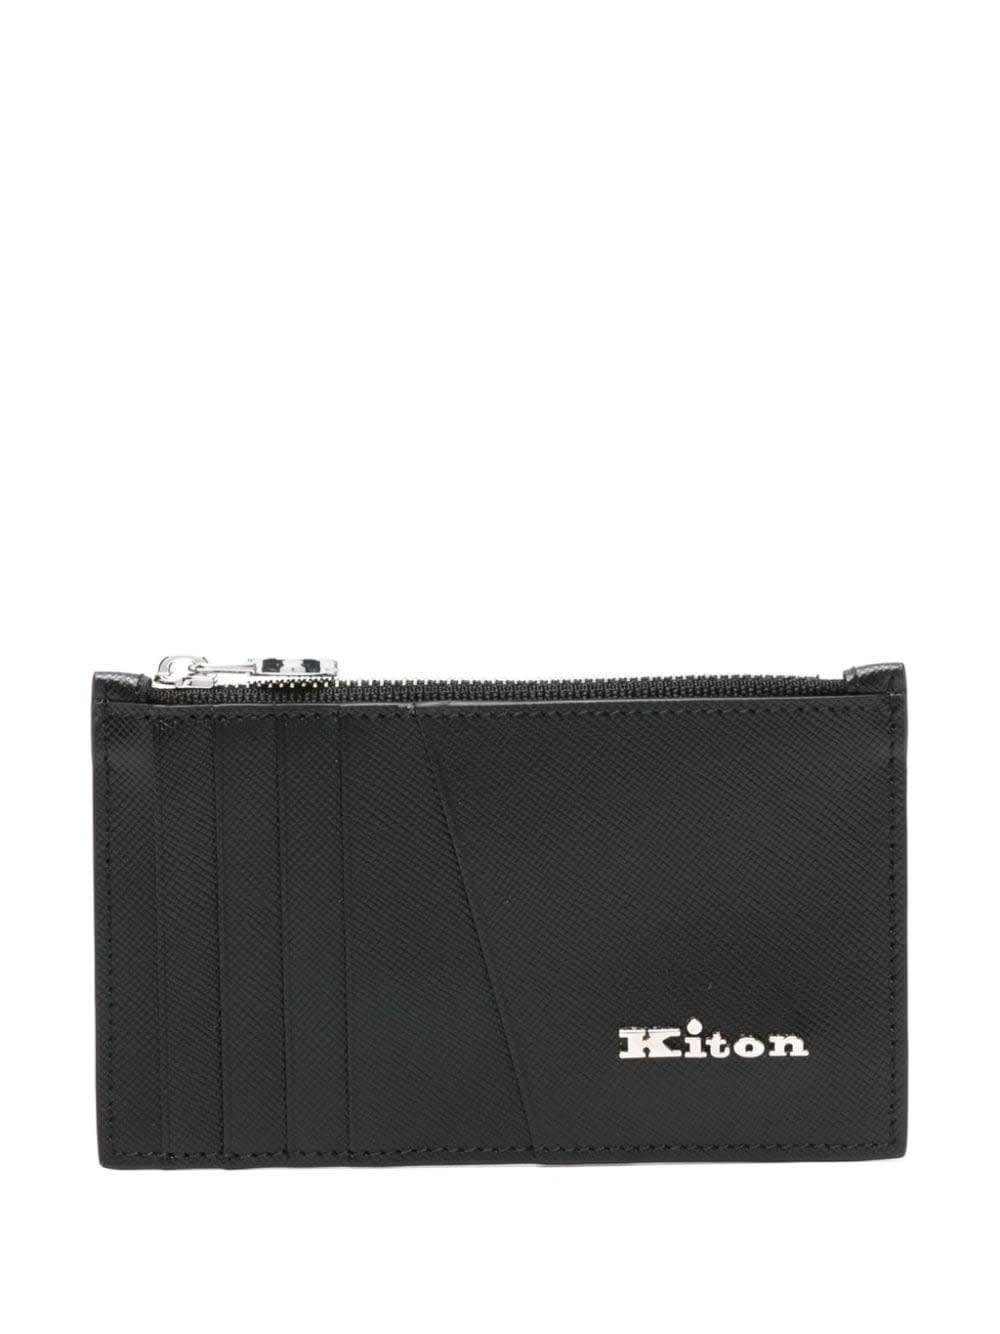 Black Leather Card Holder With Logo